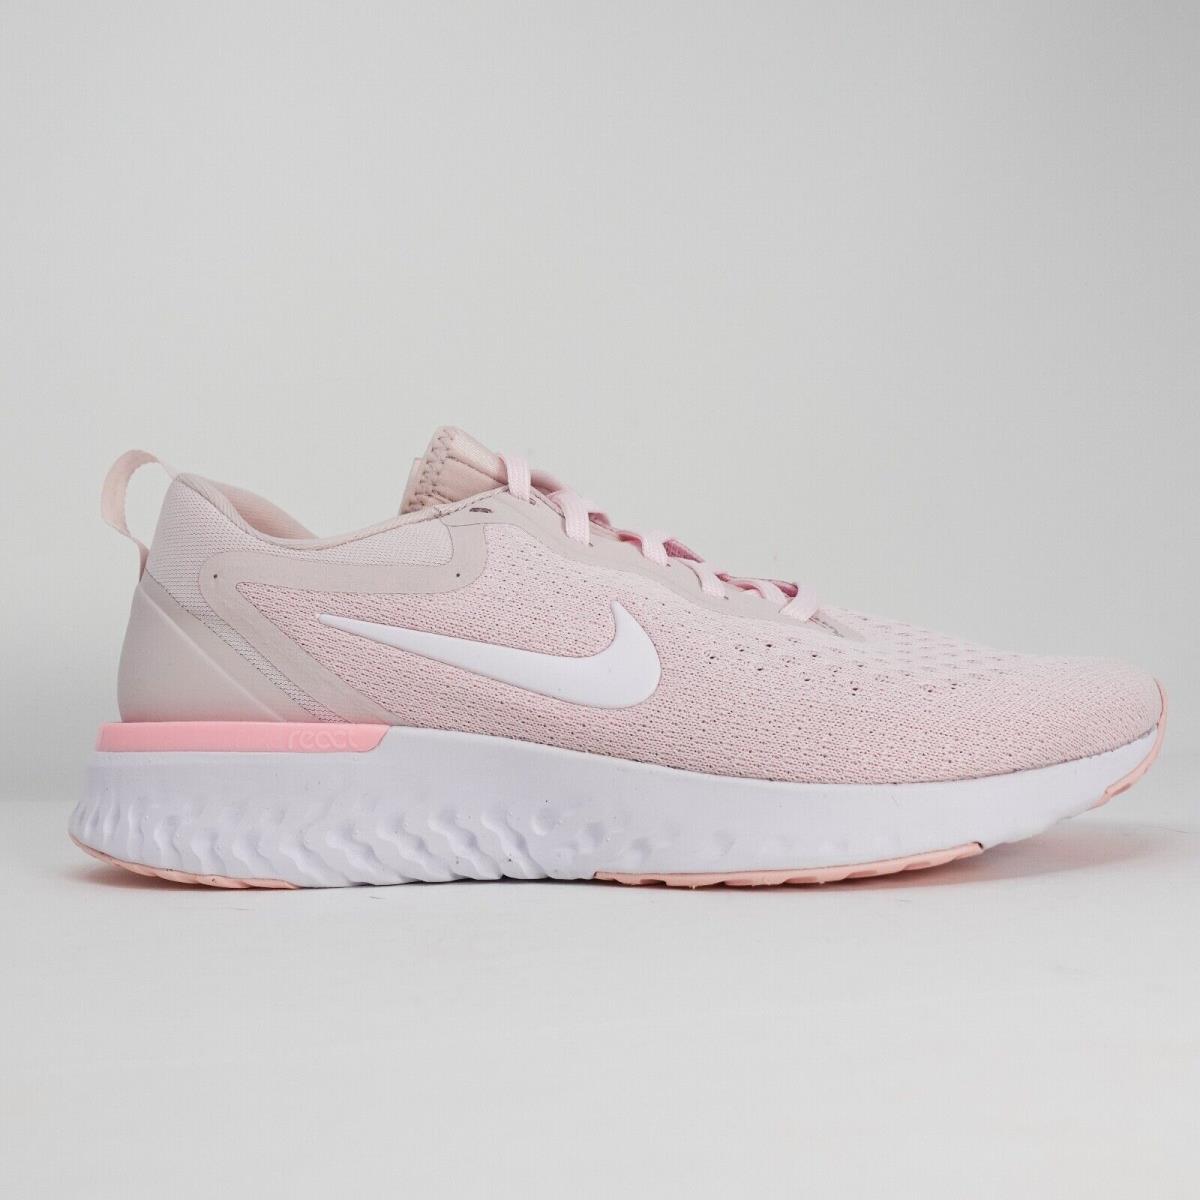 in progress Jolly ice Nike Odyssey React Arctic Pink Women`s Running Shoes AO9820-600 Size 9.5 |  883212586568 - Nike shoes Odyssey React - Pink | SporTipTop